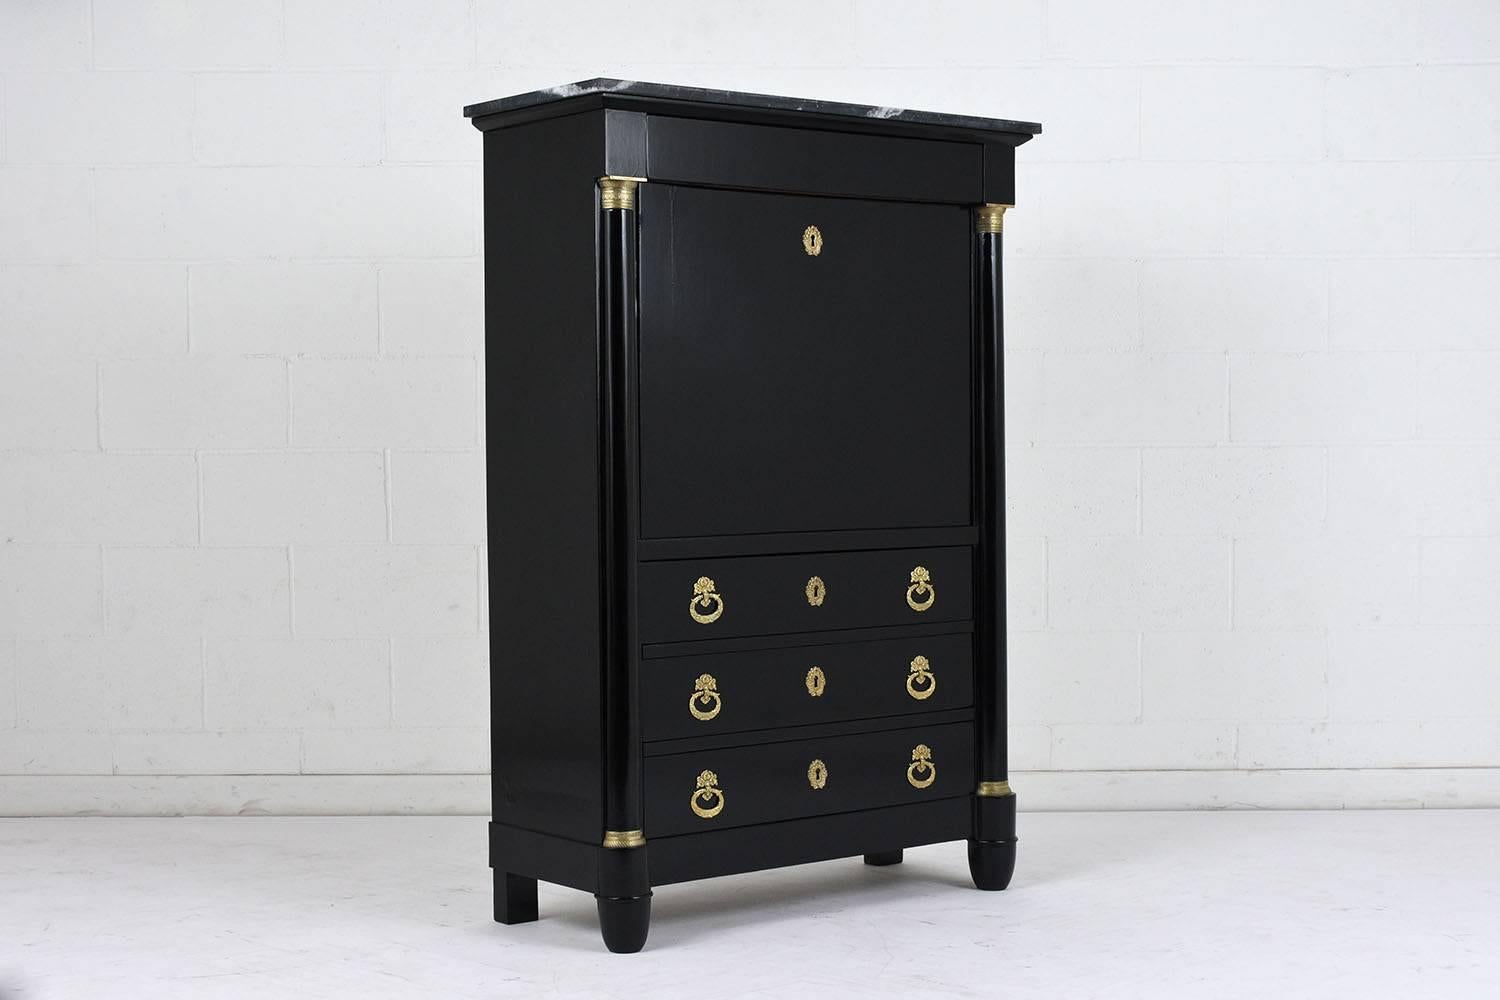 This 1890s French Empire style secretaire is made of wood stained in a deep black color with a lacquered finish. At the top of secretaire is a small drawer with three larger drawers below the desk. The drawers have decorative brass drawer pulls and